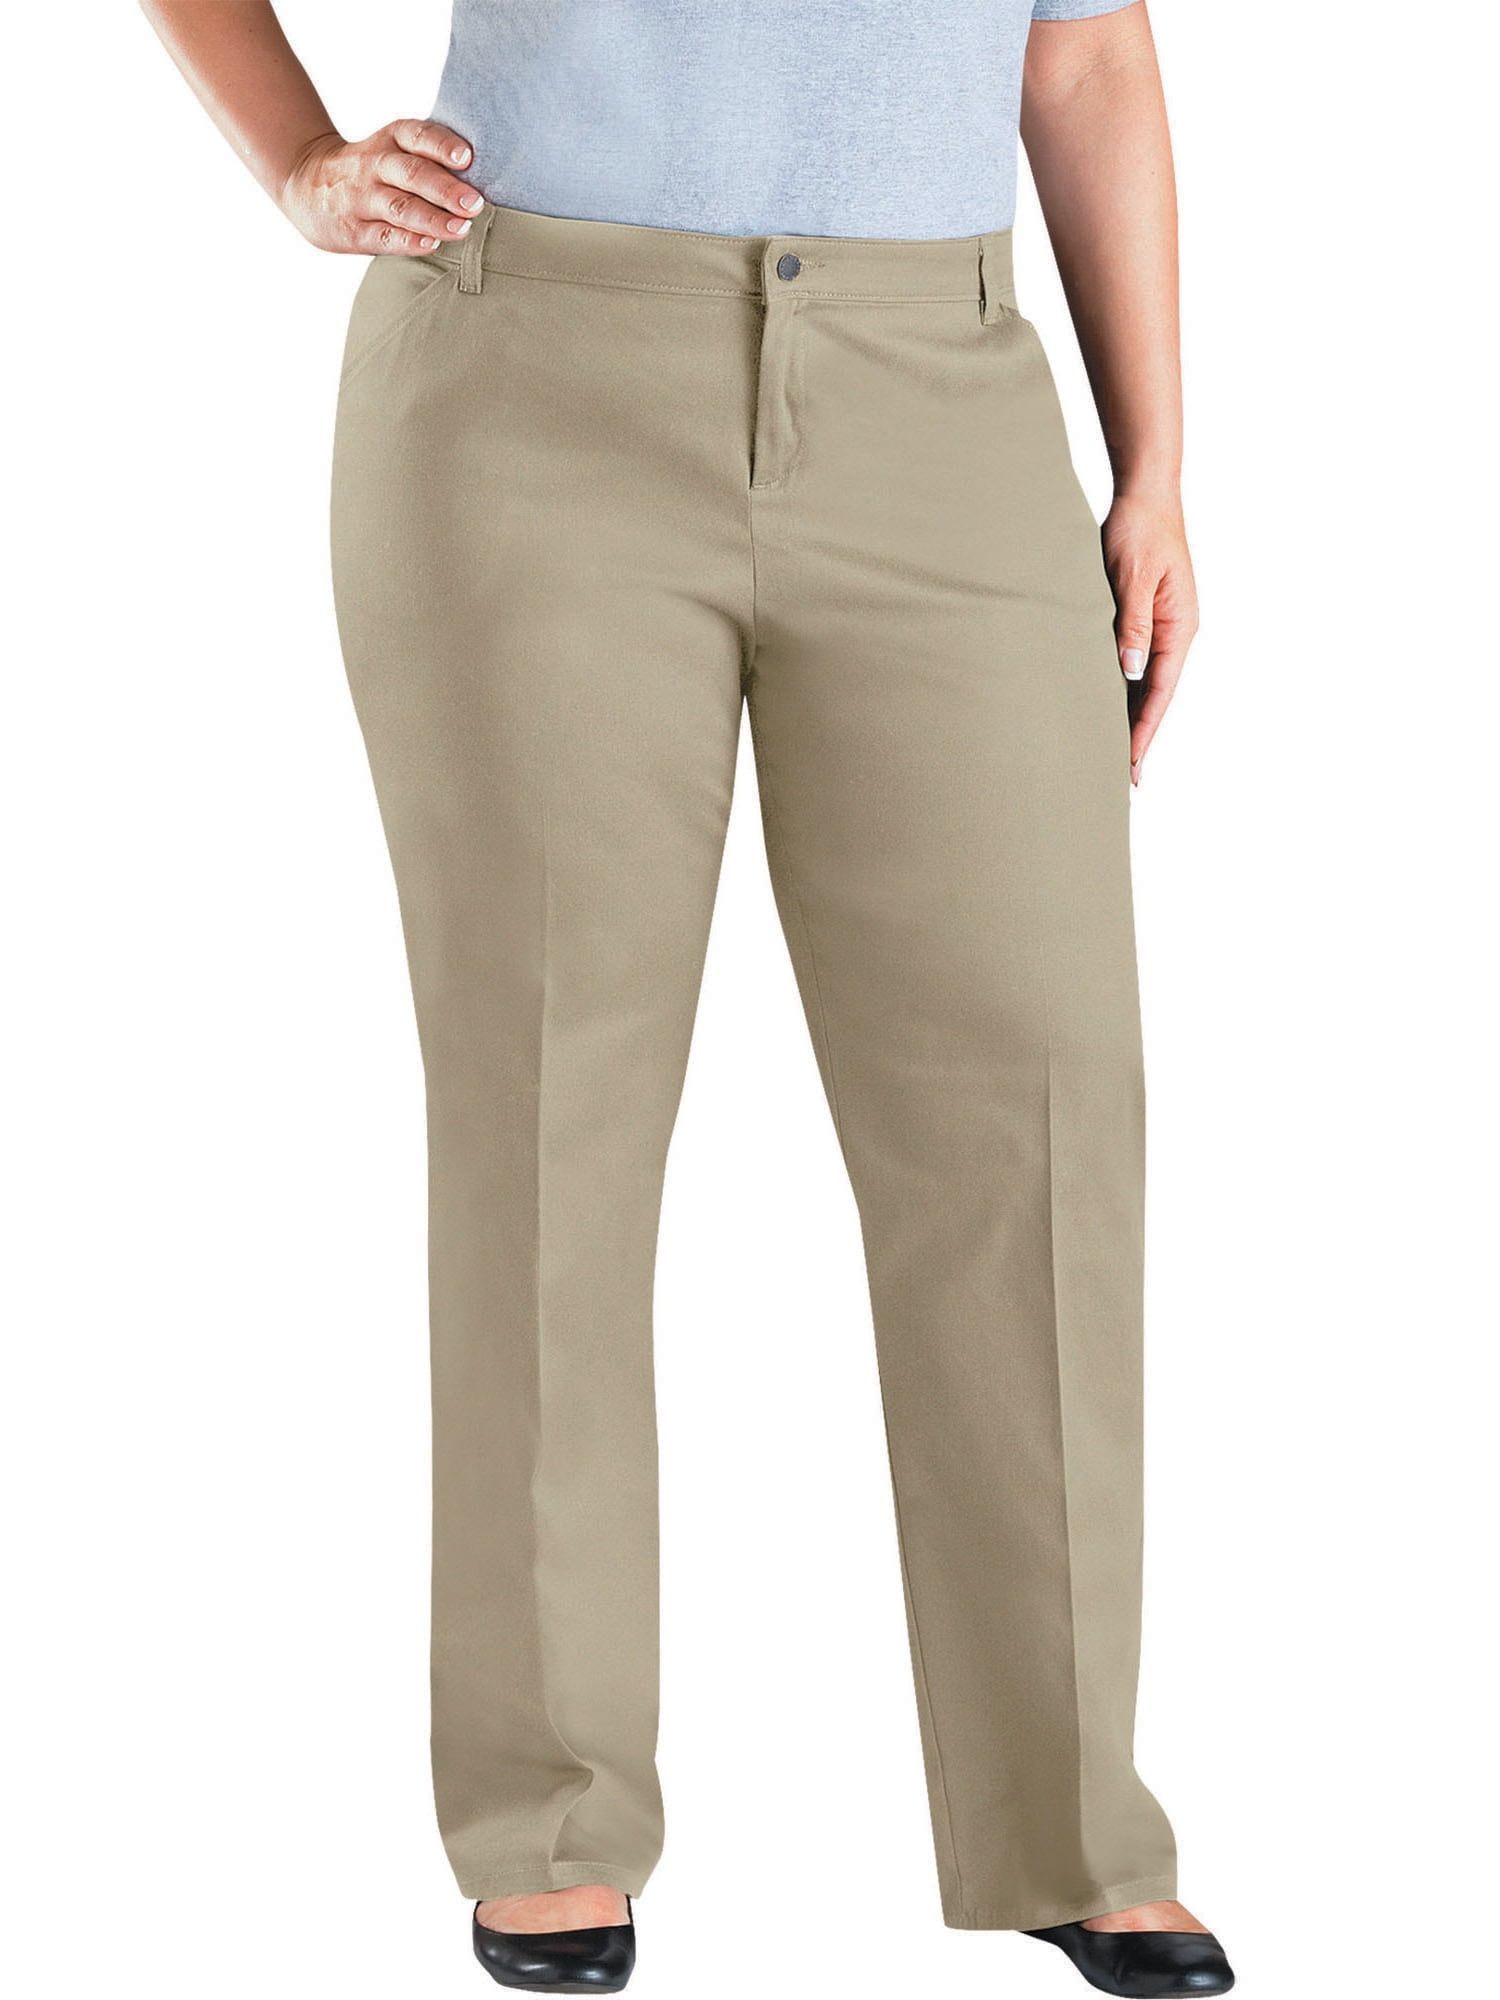 Genuine Dickies Women's Plus Size Mid rise Relaxed Fit Straight Leg ...